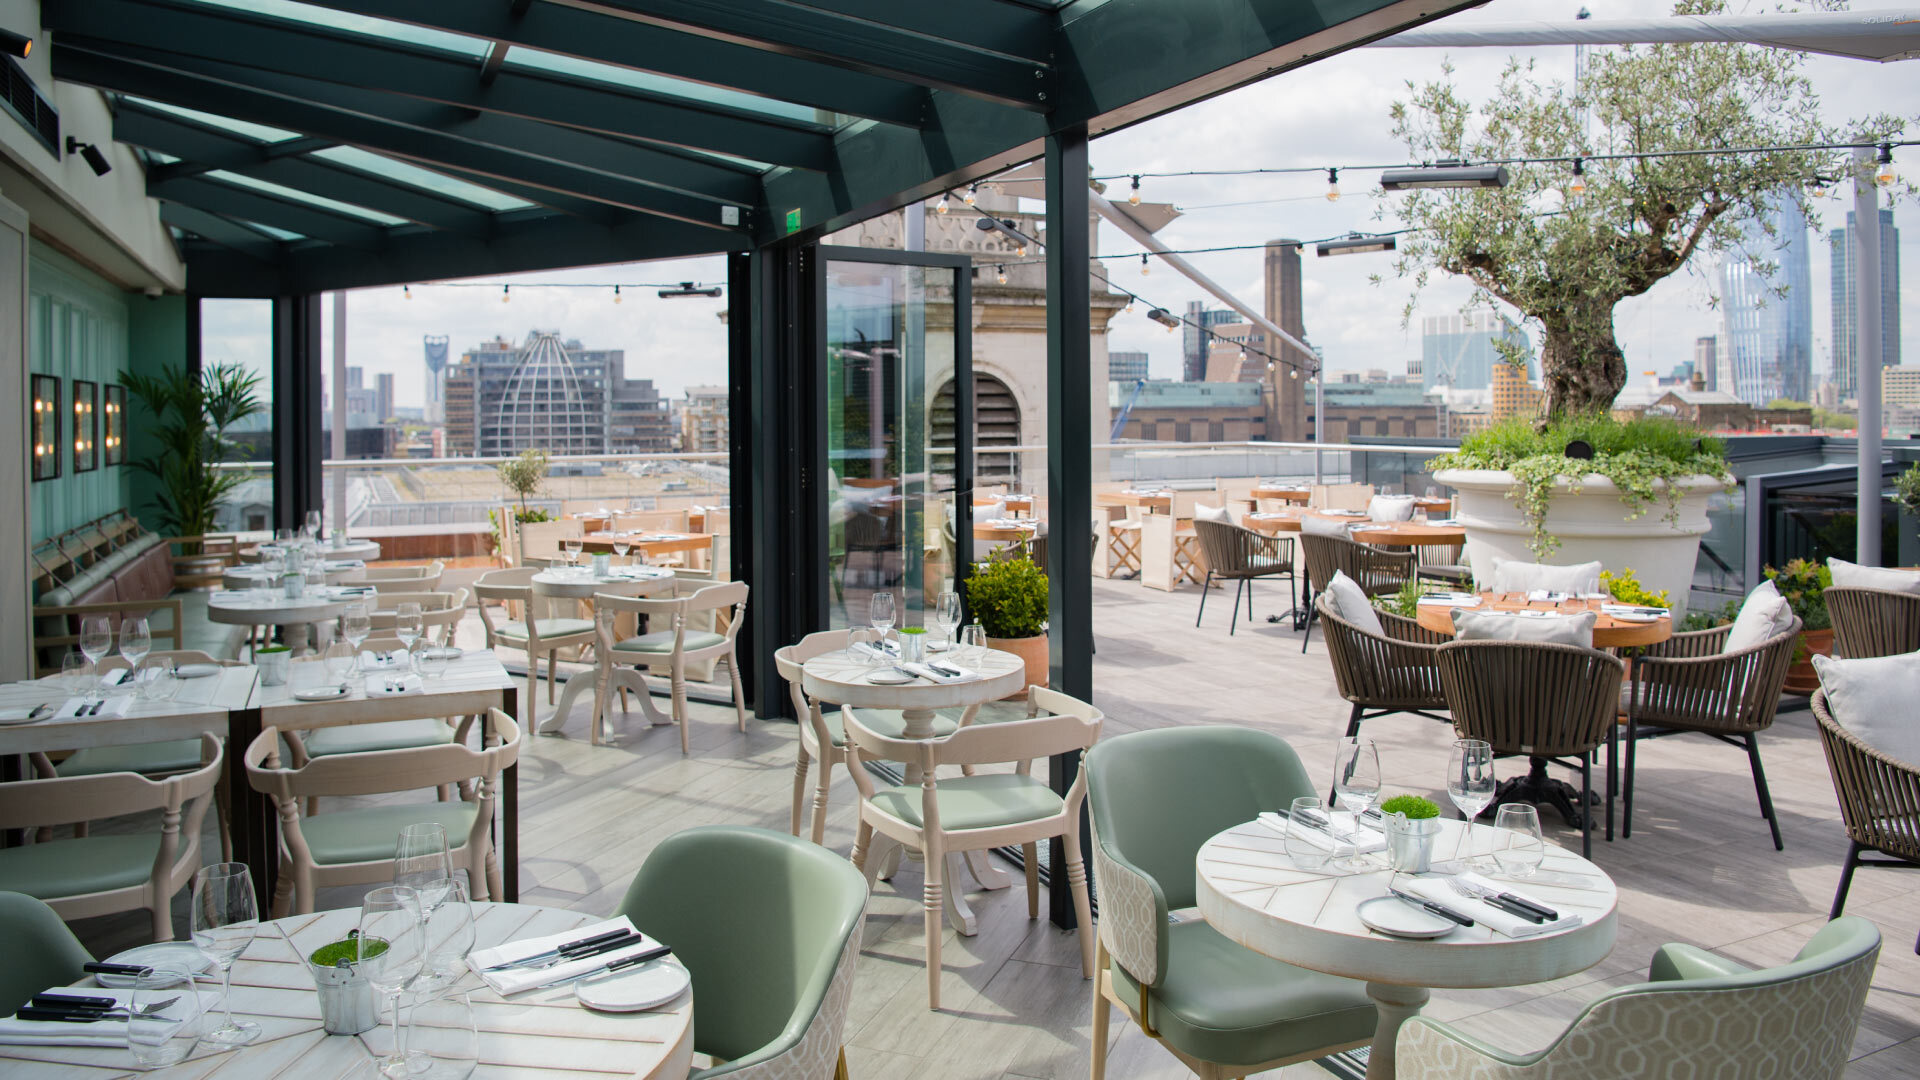 11 Rooftop Bars & Restaurants in the City of London - Vintry & Mercer Hotel - circular tables on roof terrace, large potted olive tree